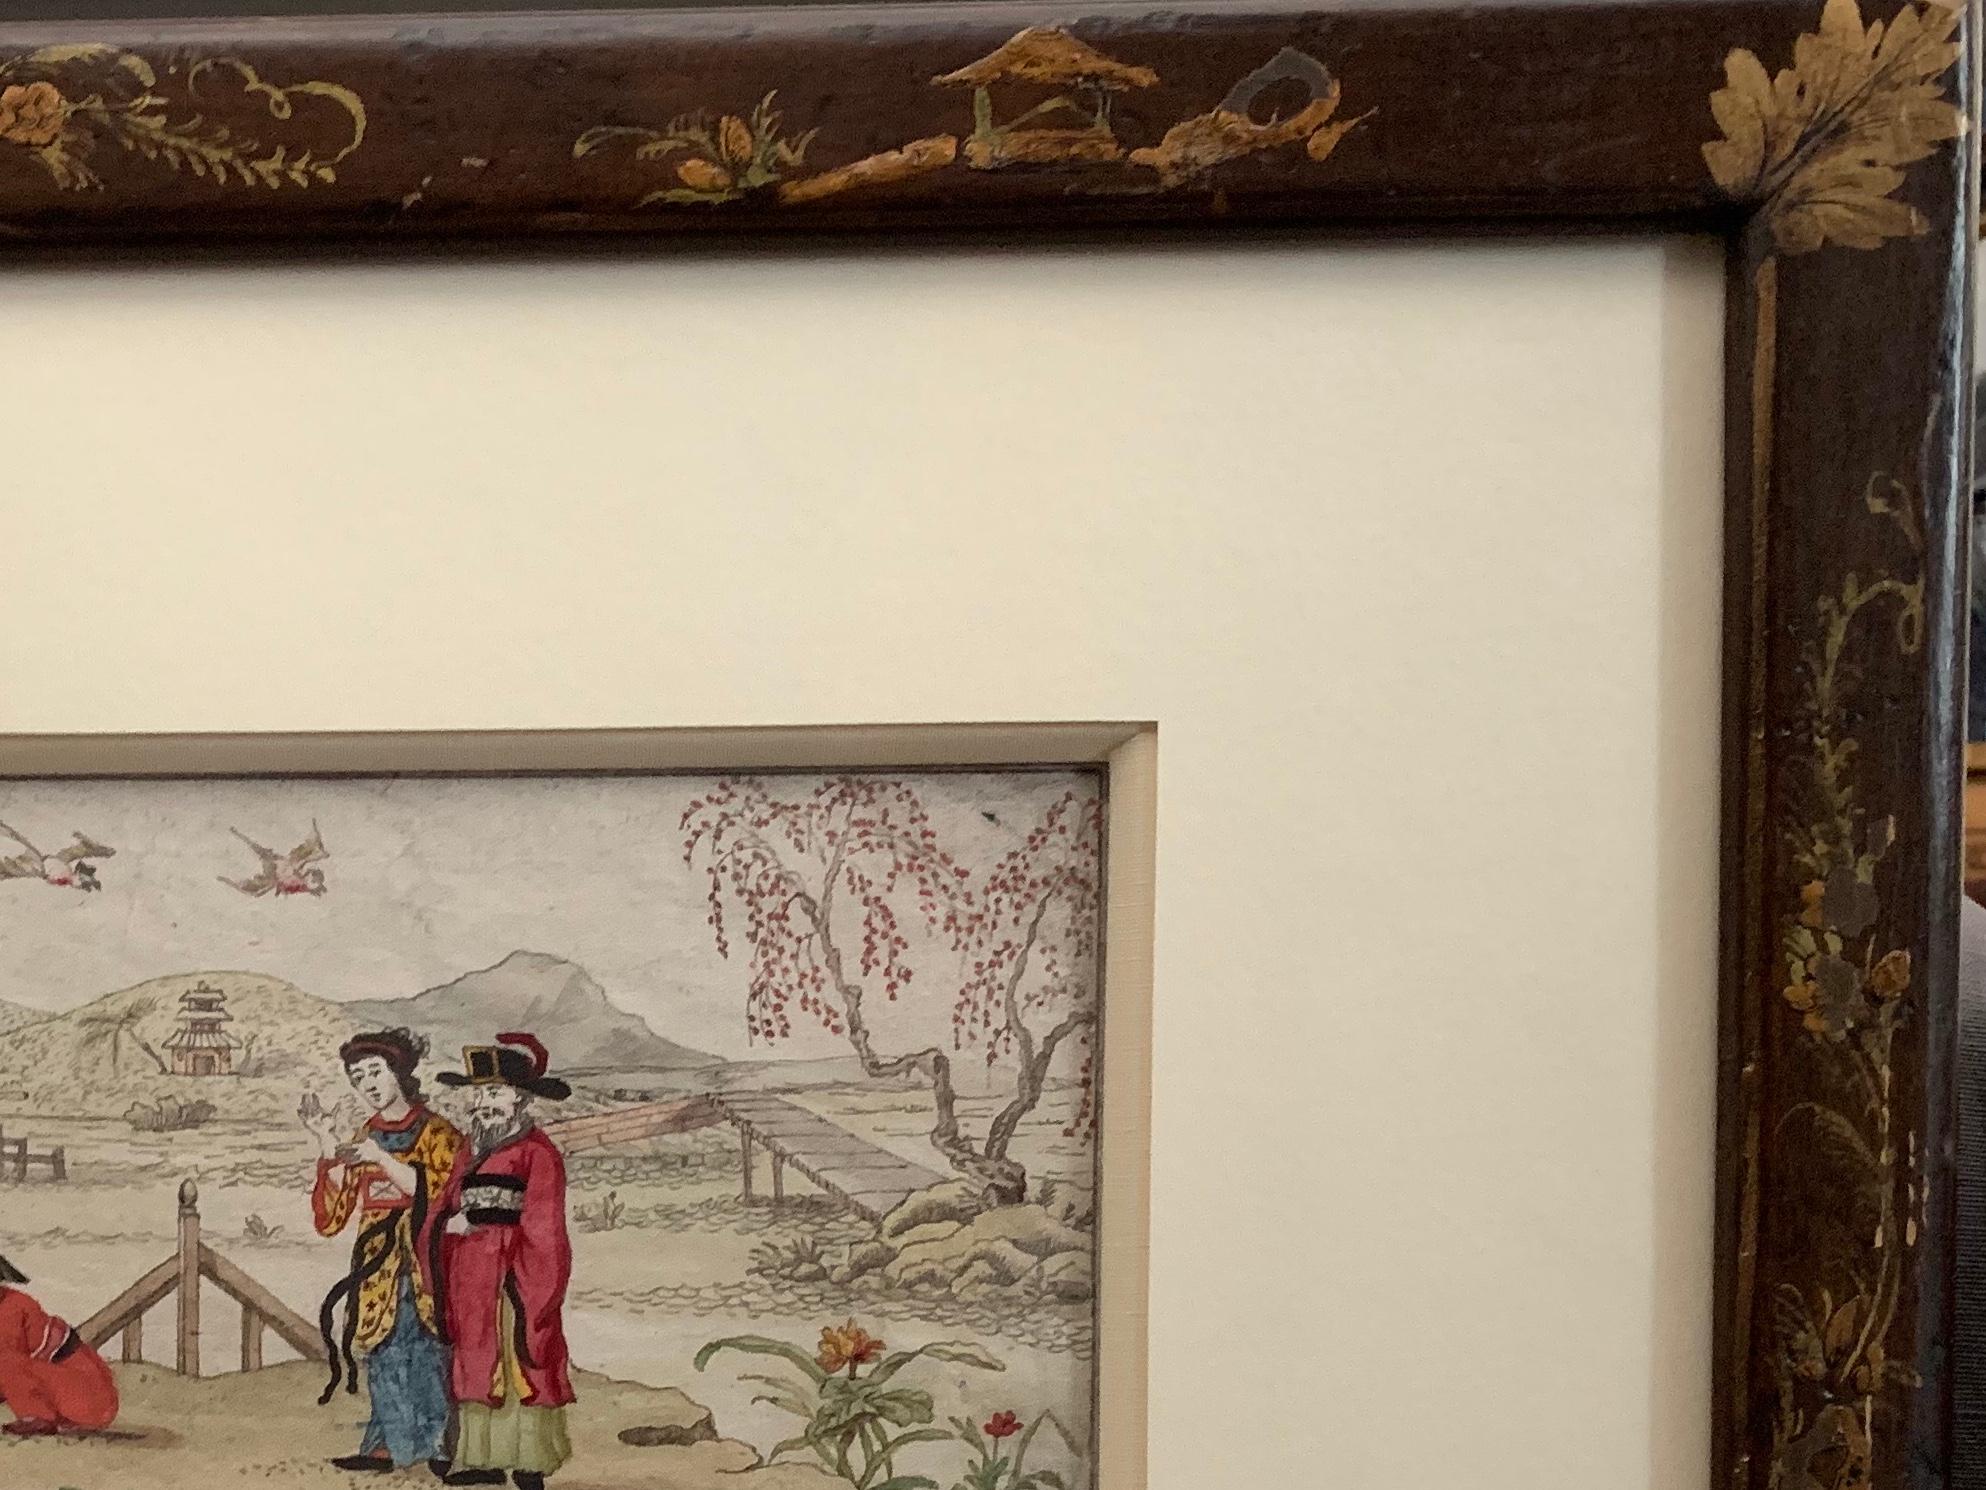 French chinoiserie scene. Early hand-drawn and colored cartoon scene, in the chinoiserie style with figures in antique pink Oriental dress in landscape with birds and flowering trees in vintage lacquered chinoiserie frame. France, early